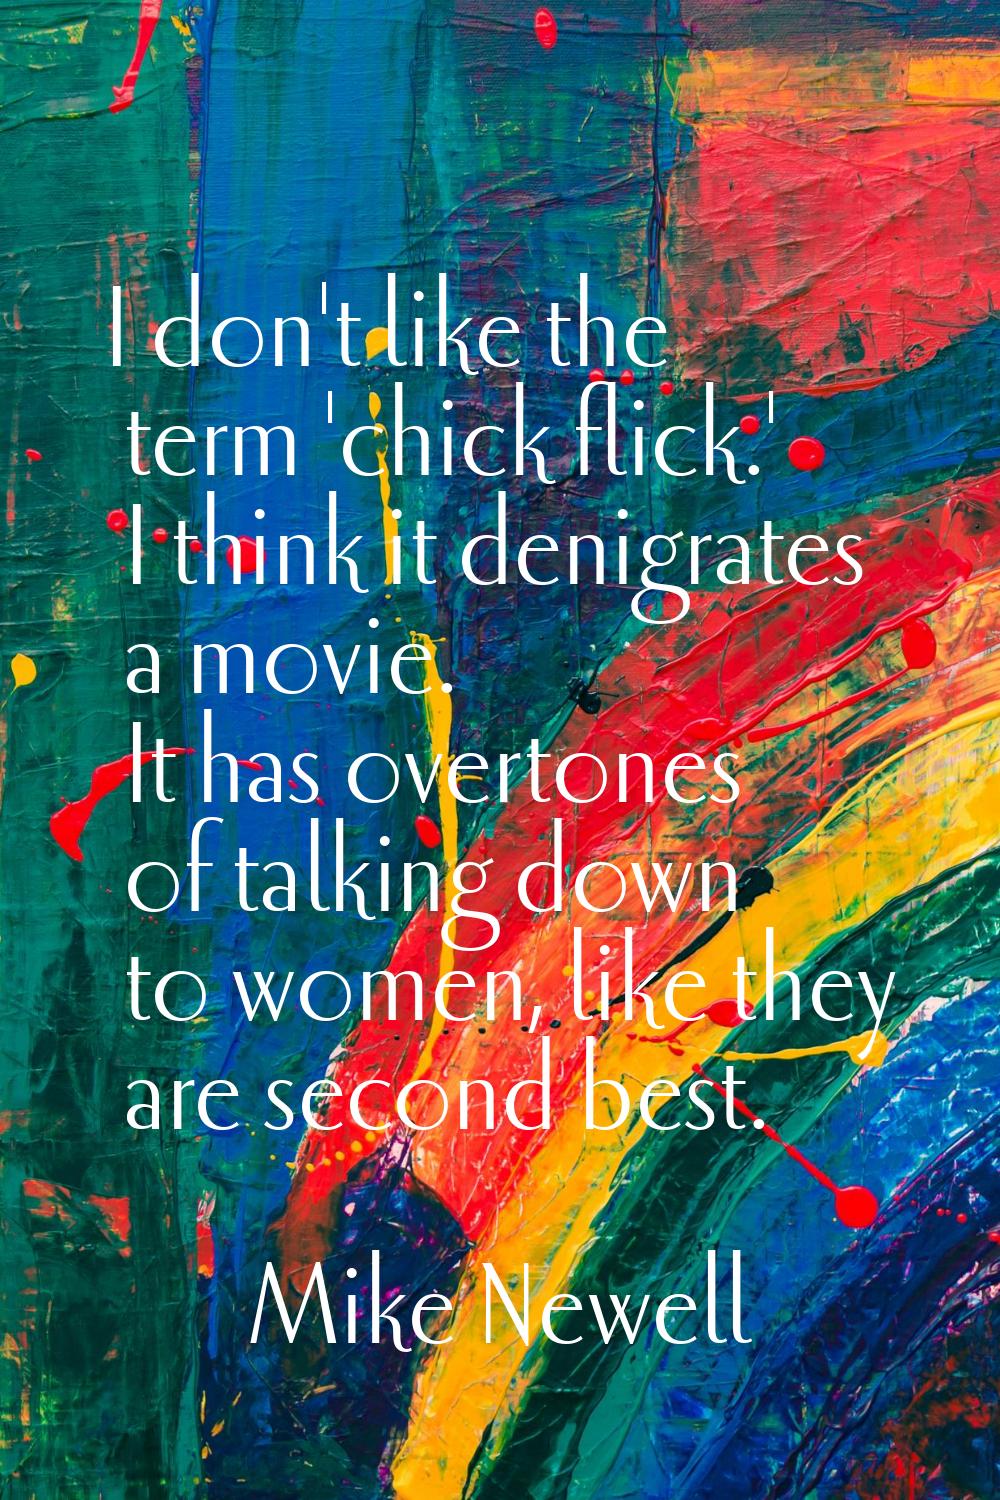 I don't like the term 'chick flick.' I think it denigrates a movie. It has overtones of talking dow